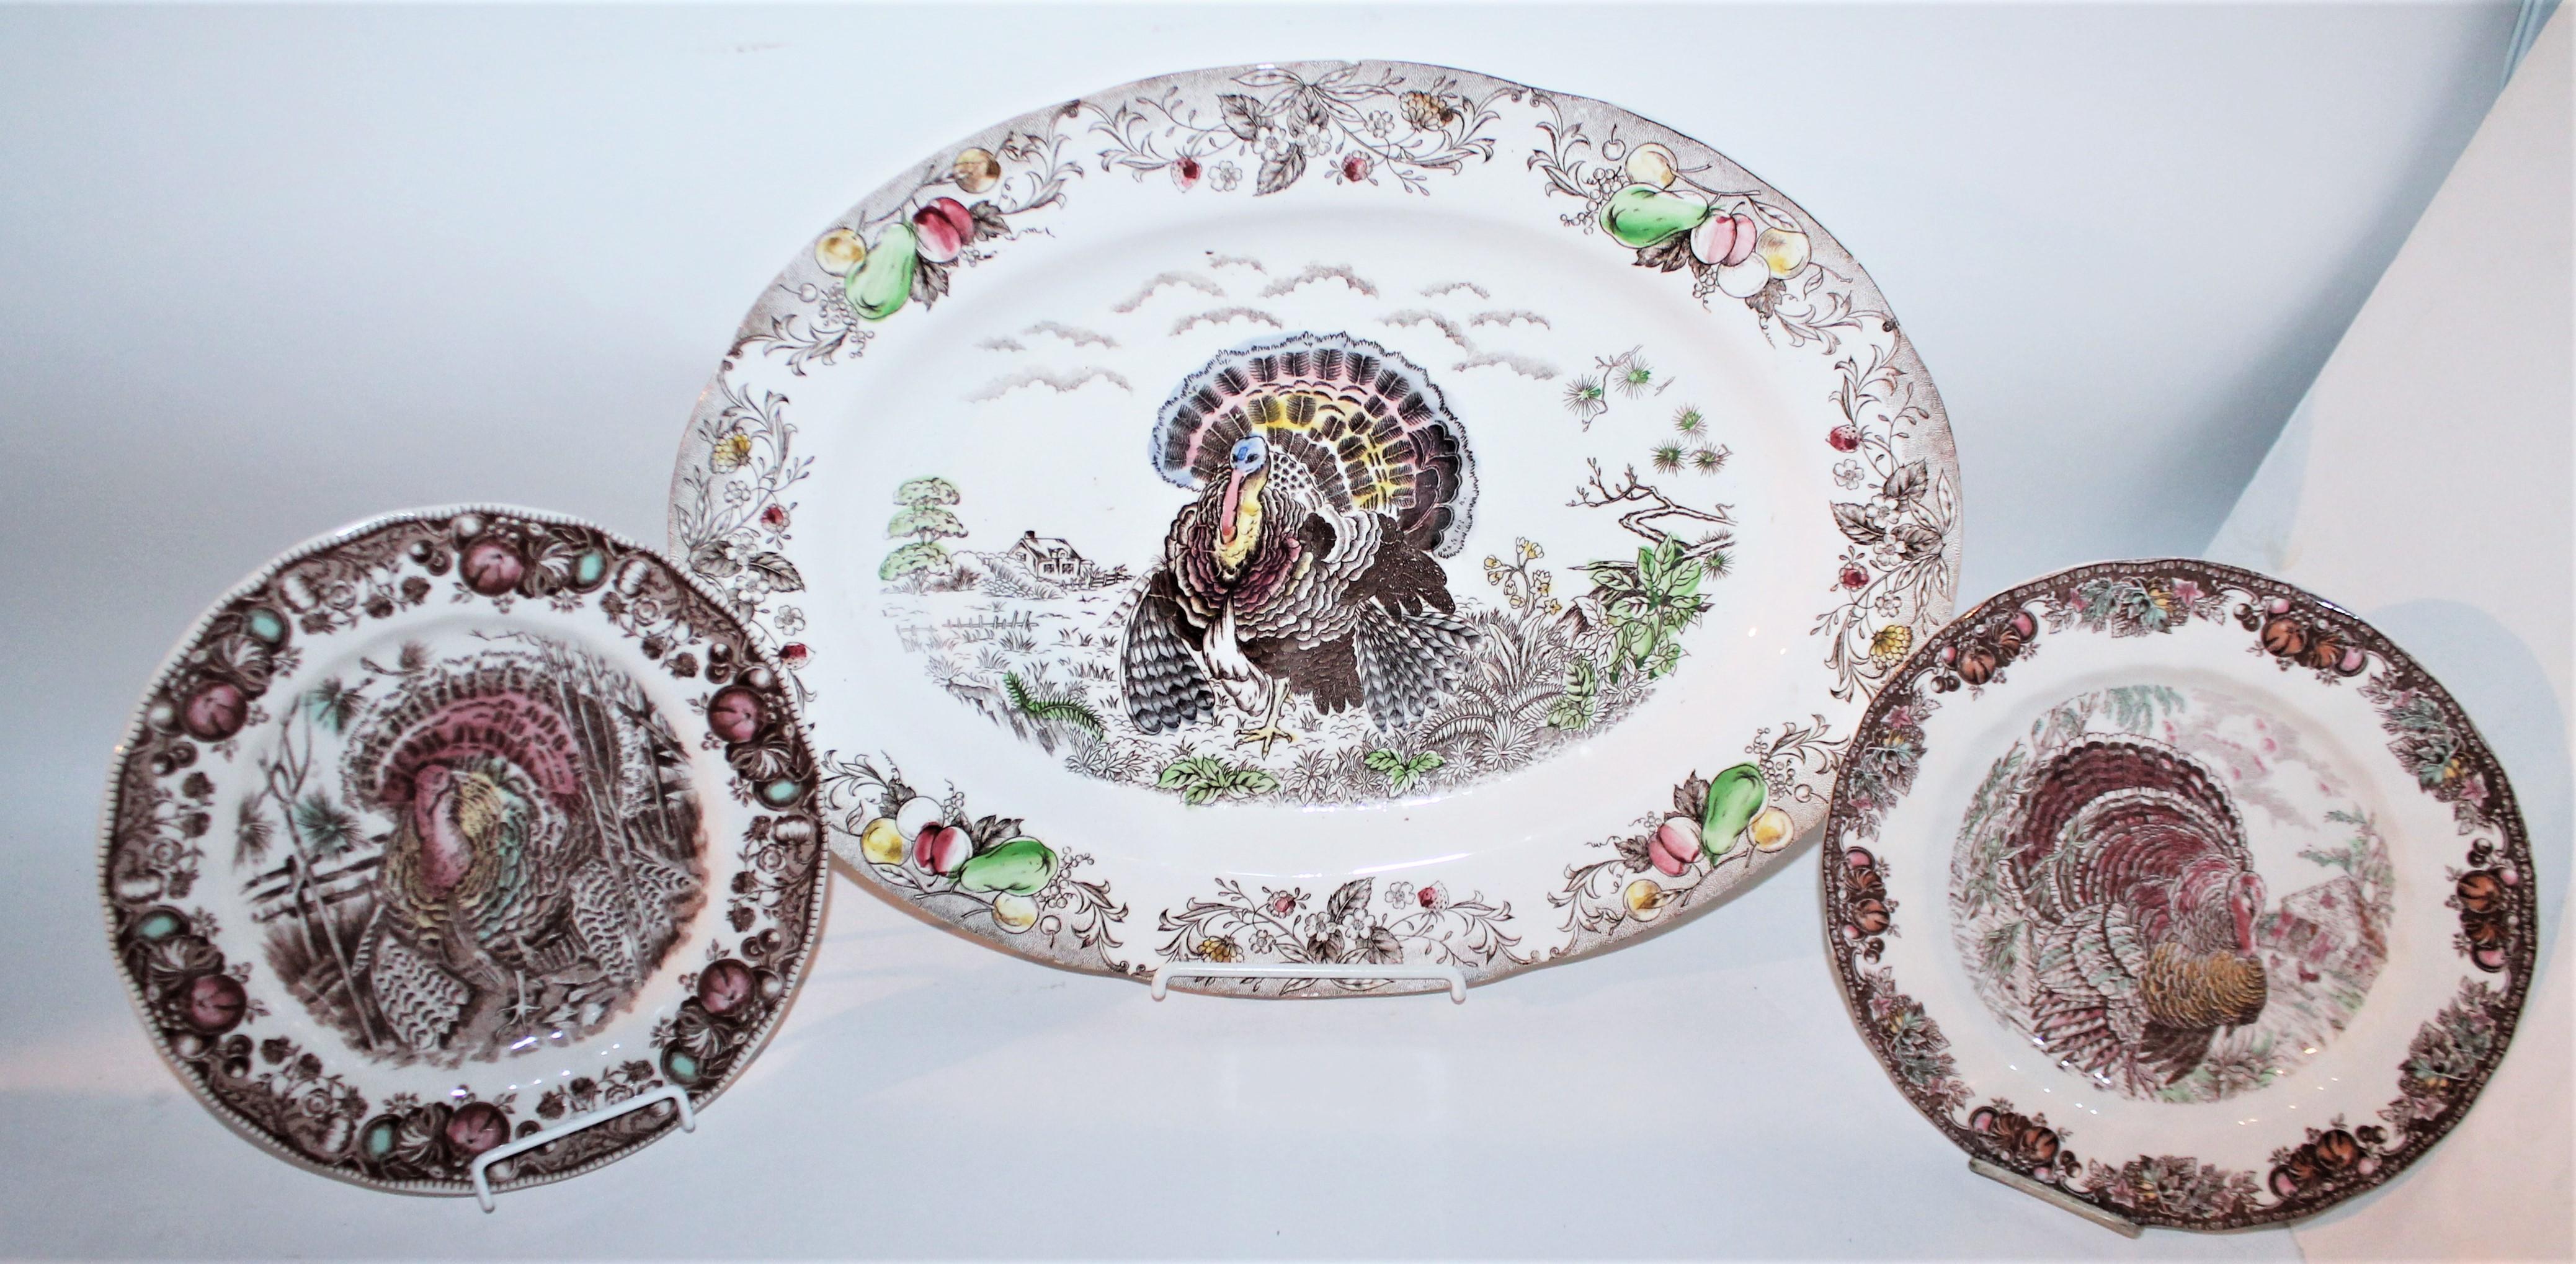 Large English Turkey platter, Johnson Bros. and a set of three English Autumn Monarch Turkey plates.

English hand engraved Johnson Bros. set of three plates.
Decorated large and engraved turkey platter. Hand engraved and in great